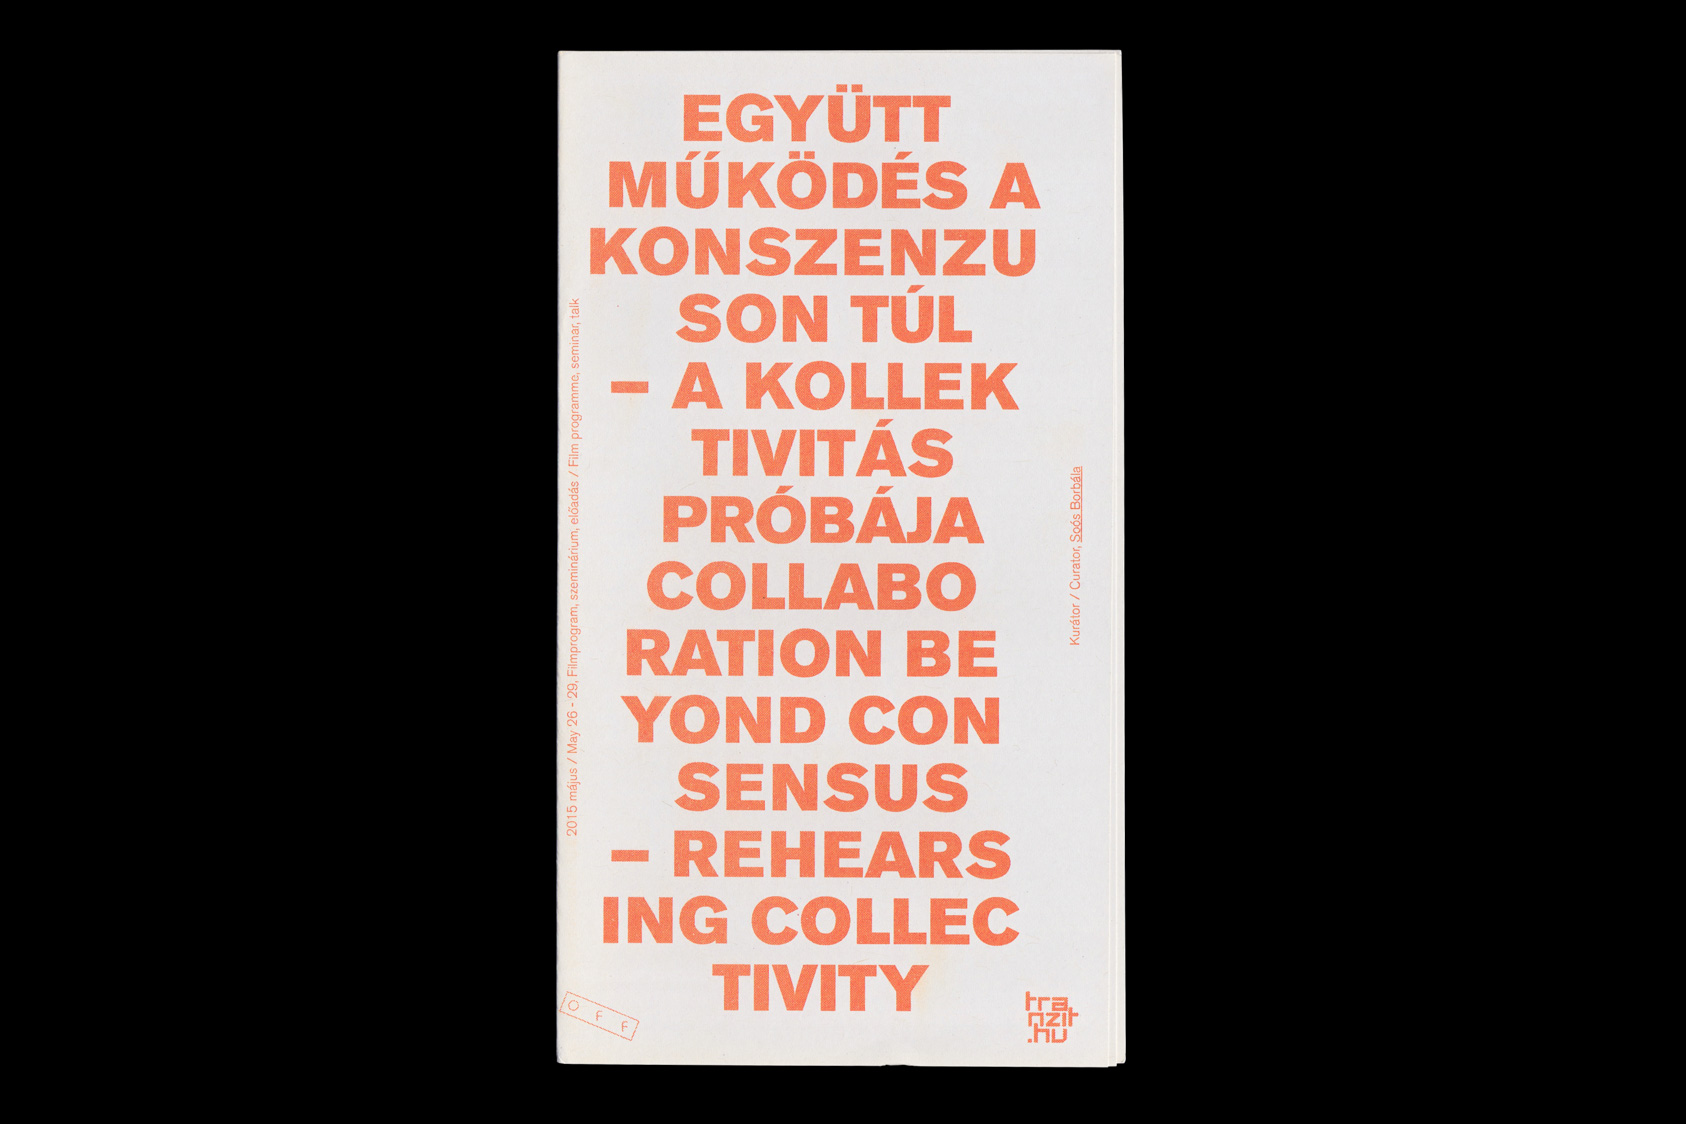 Collaboration Beyond Consensus - Rehearsing Collectivity - exhibition handout design for Borbála Soós and the Budapest Off Biennial, 2015 by the agency for emerging ideas